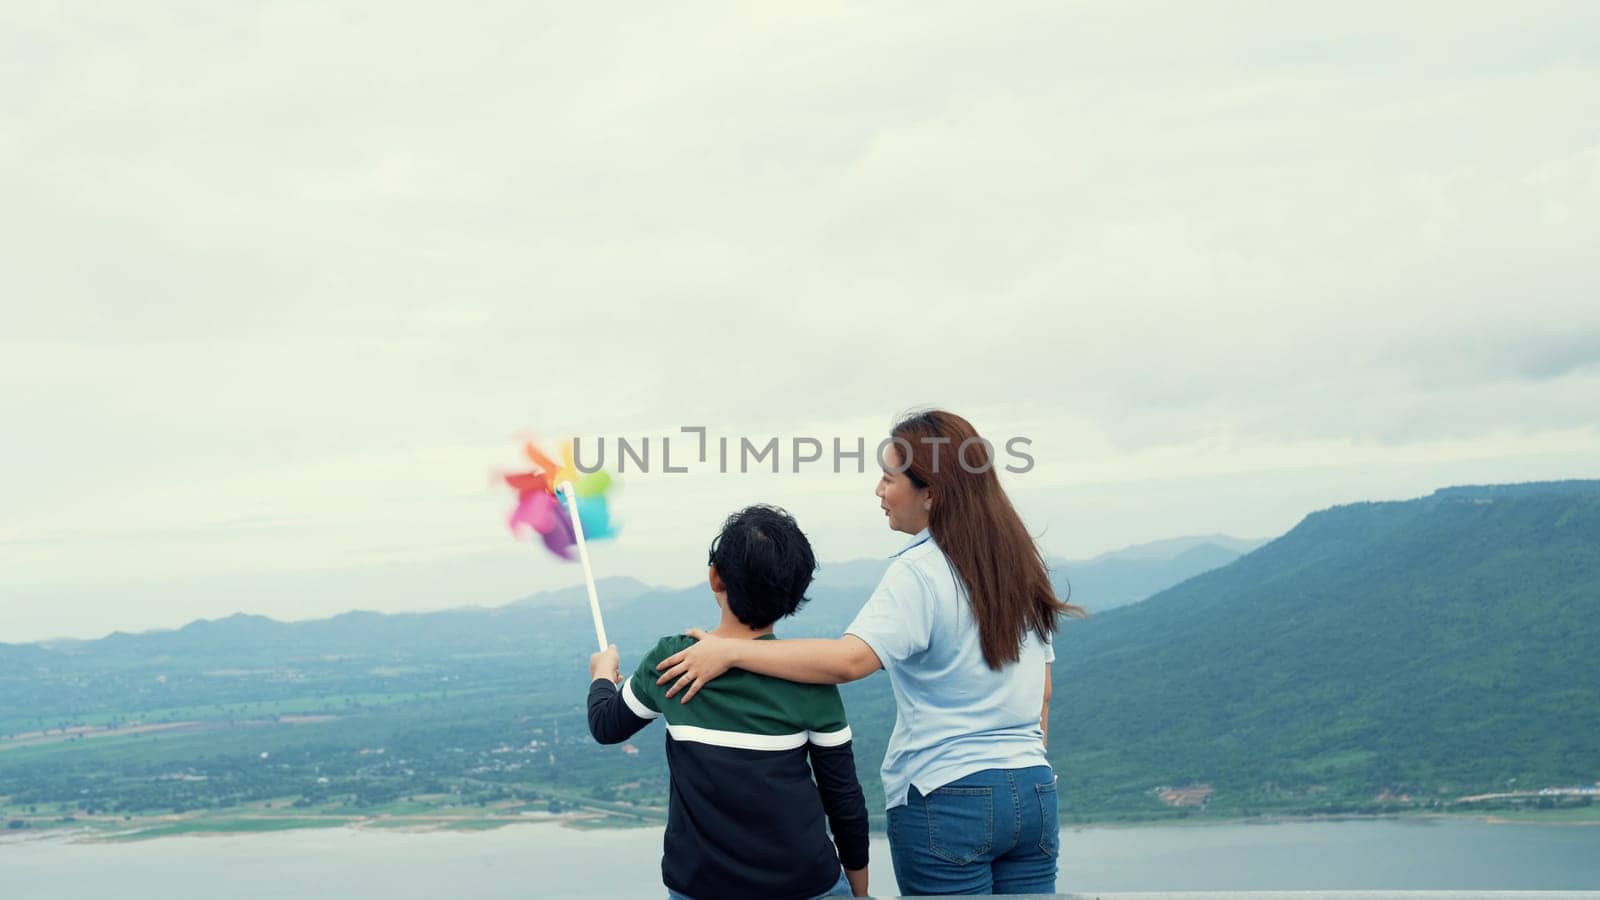 A progressive woman and her son are on vacation, enjoying the natural beauty of a lake at the bottom of a hill while the boy carries a toy windmill.